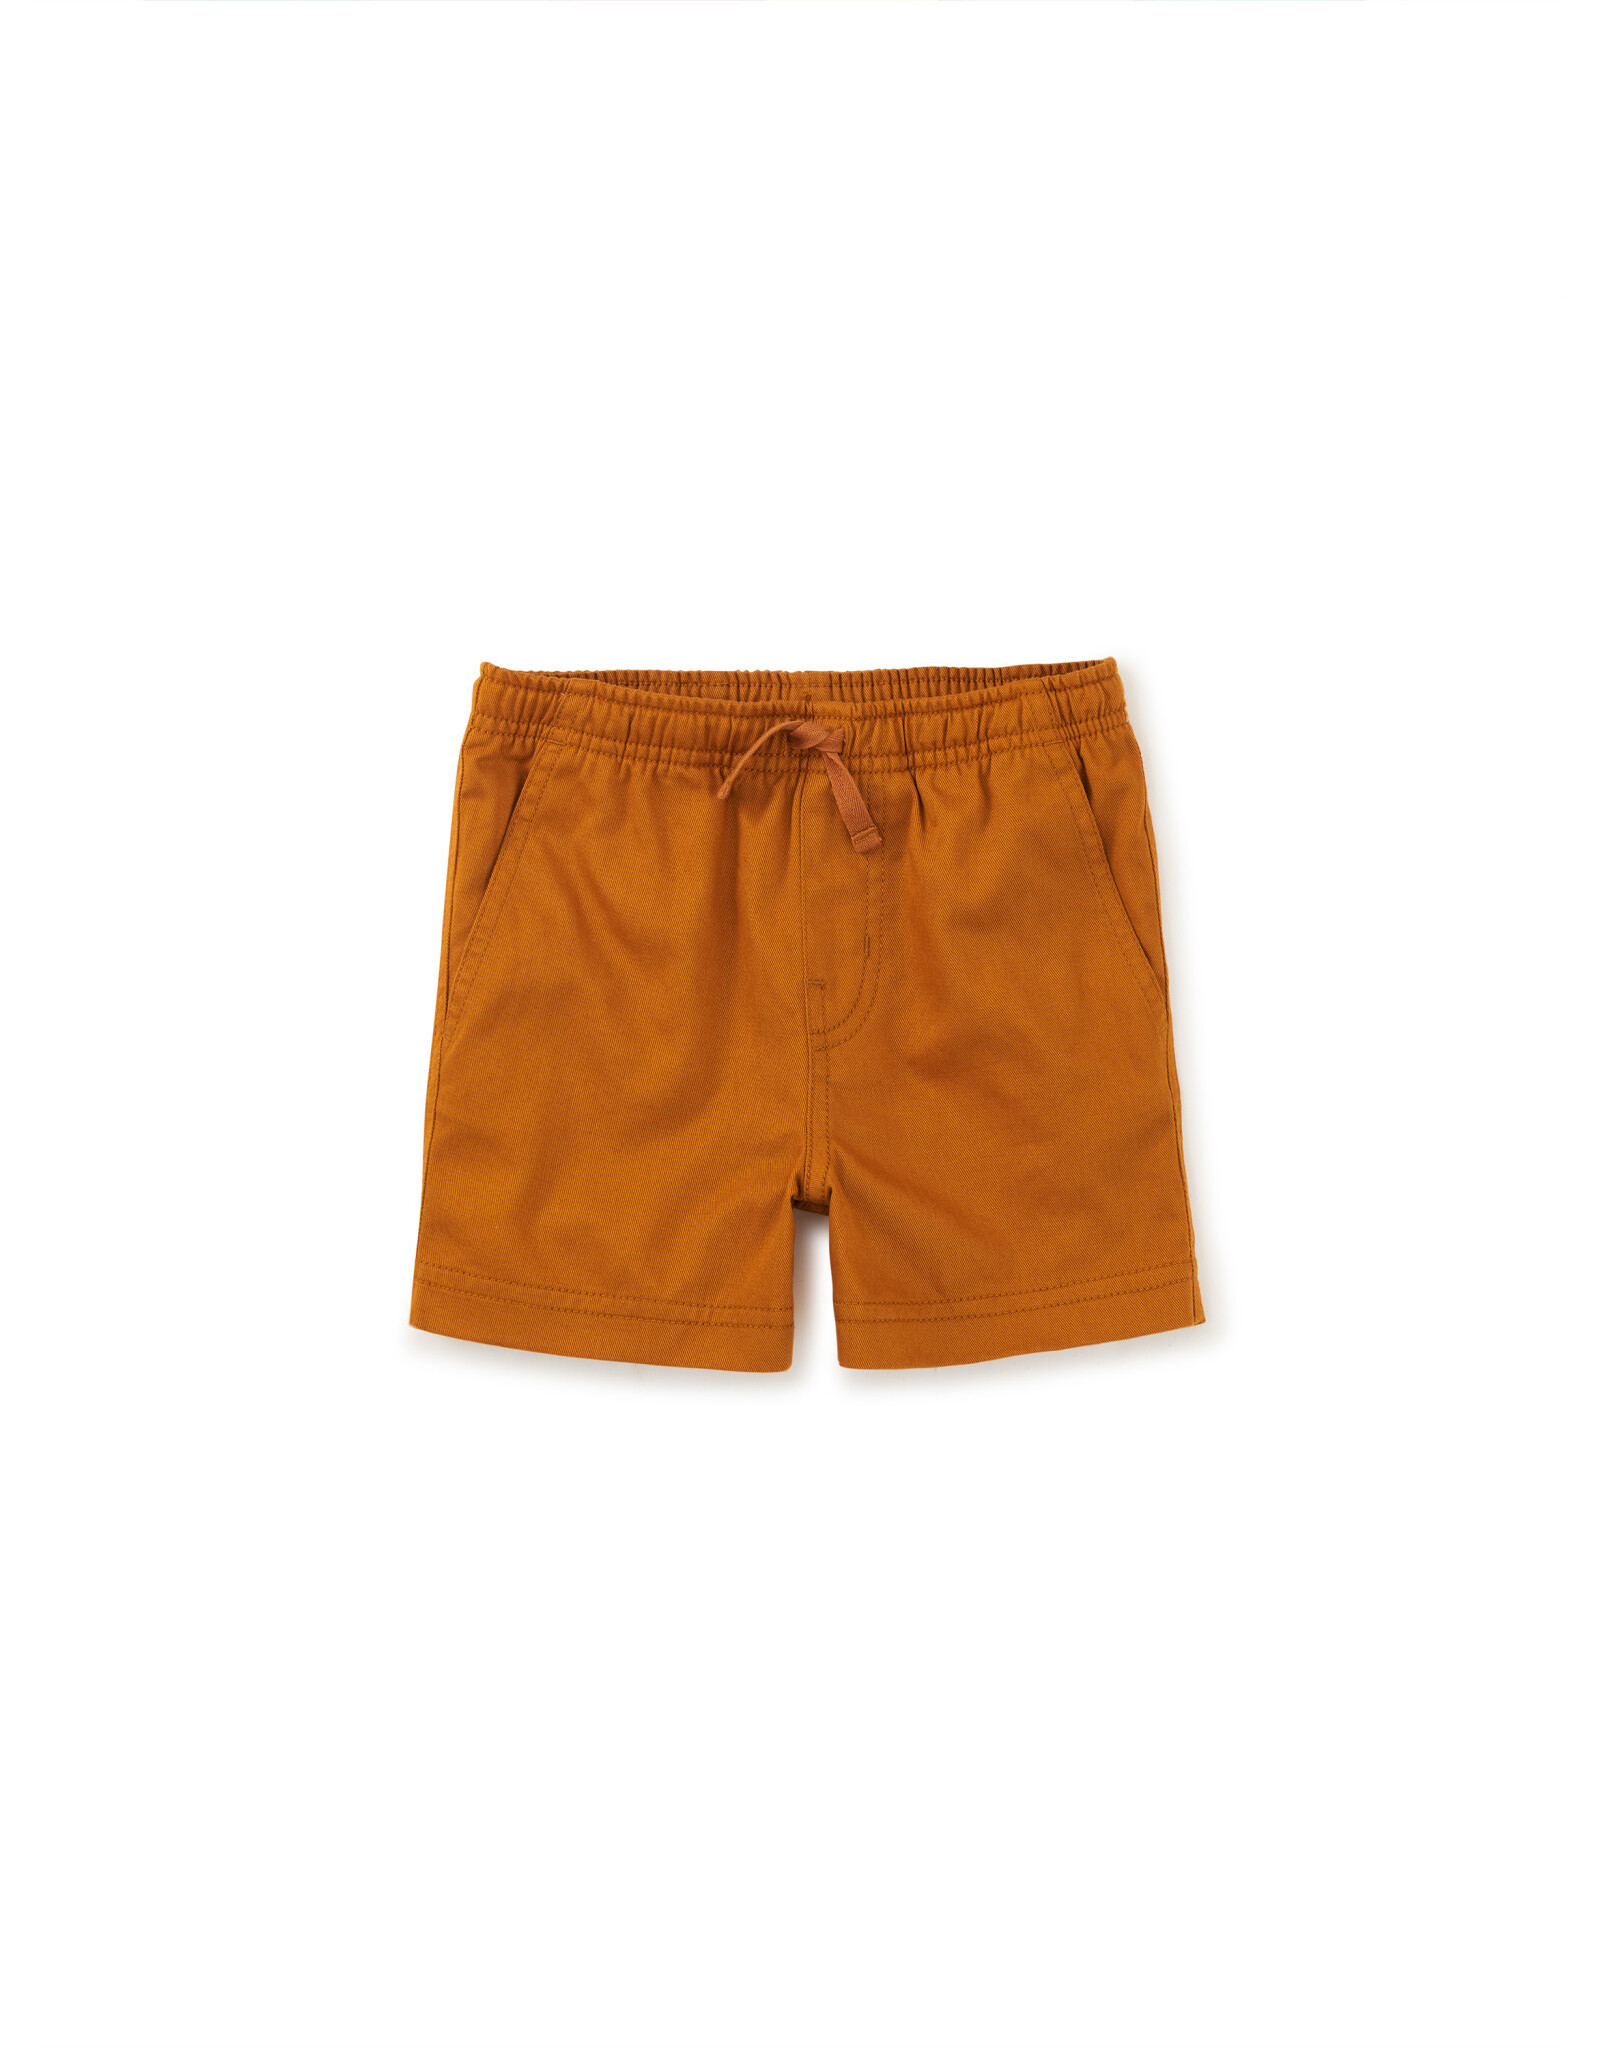 Tea Collection  Twill Sport Shorts-Nugget